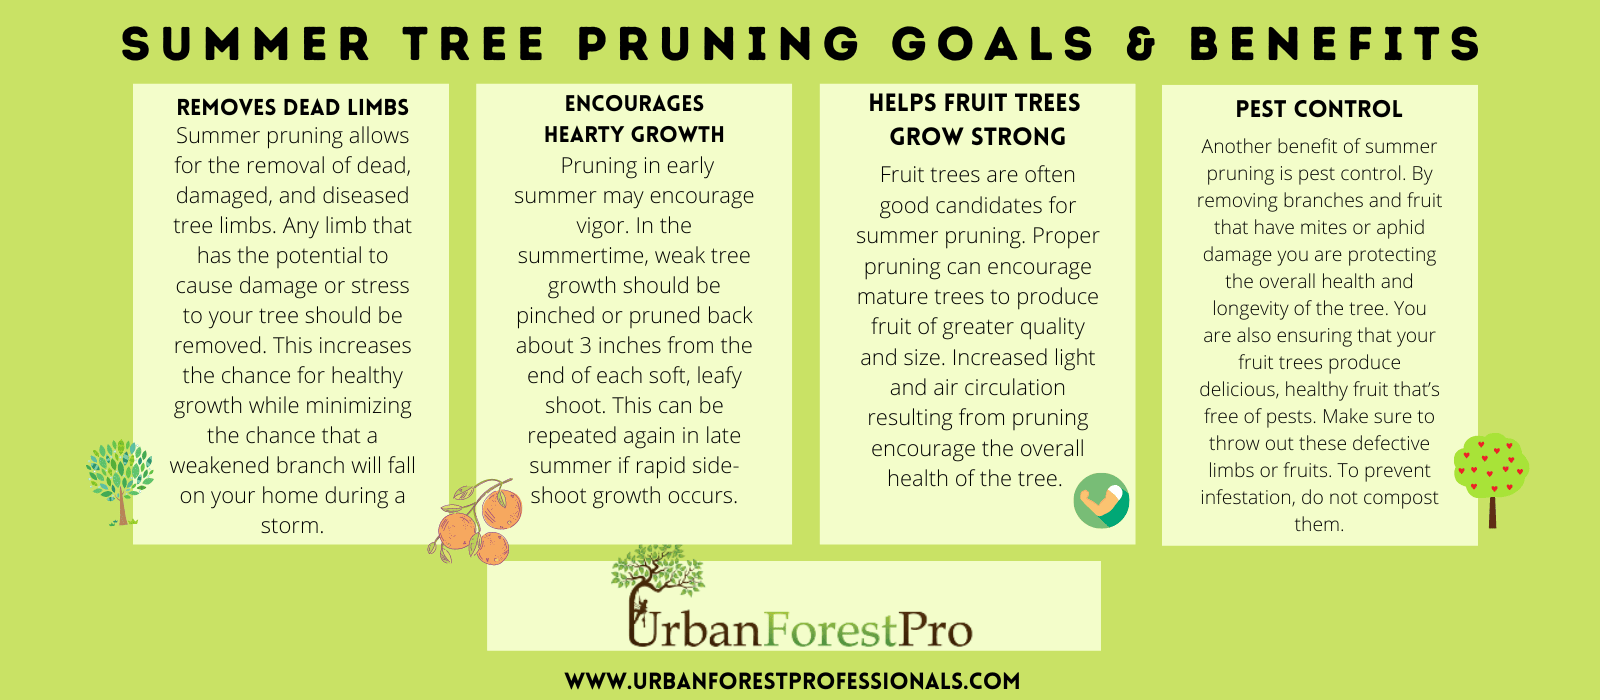 Urban Forest Pro Summer Tree Pruning Benefits can you prune trees in summer pruning and trimming trees in the summer